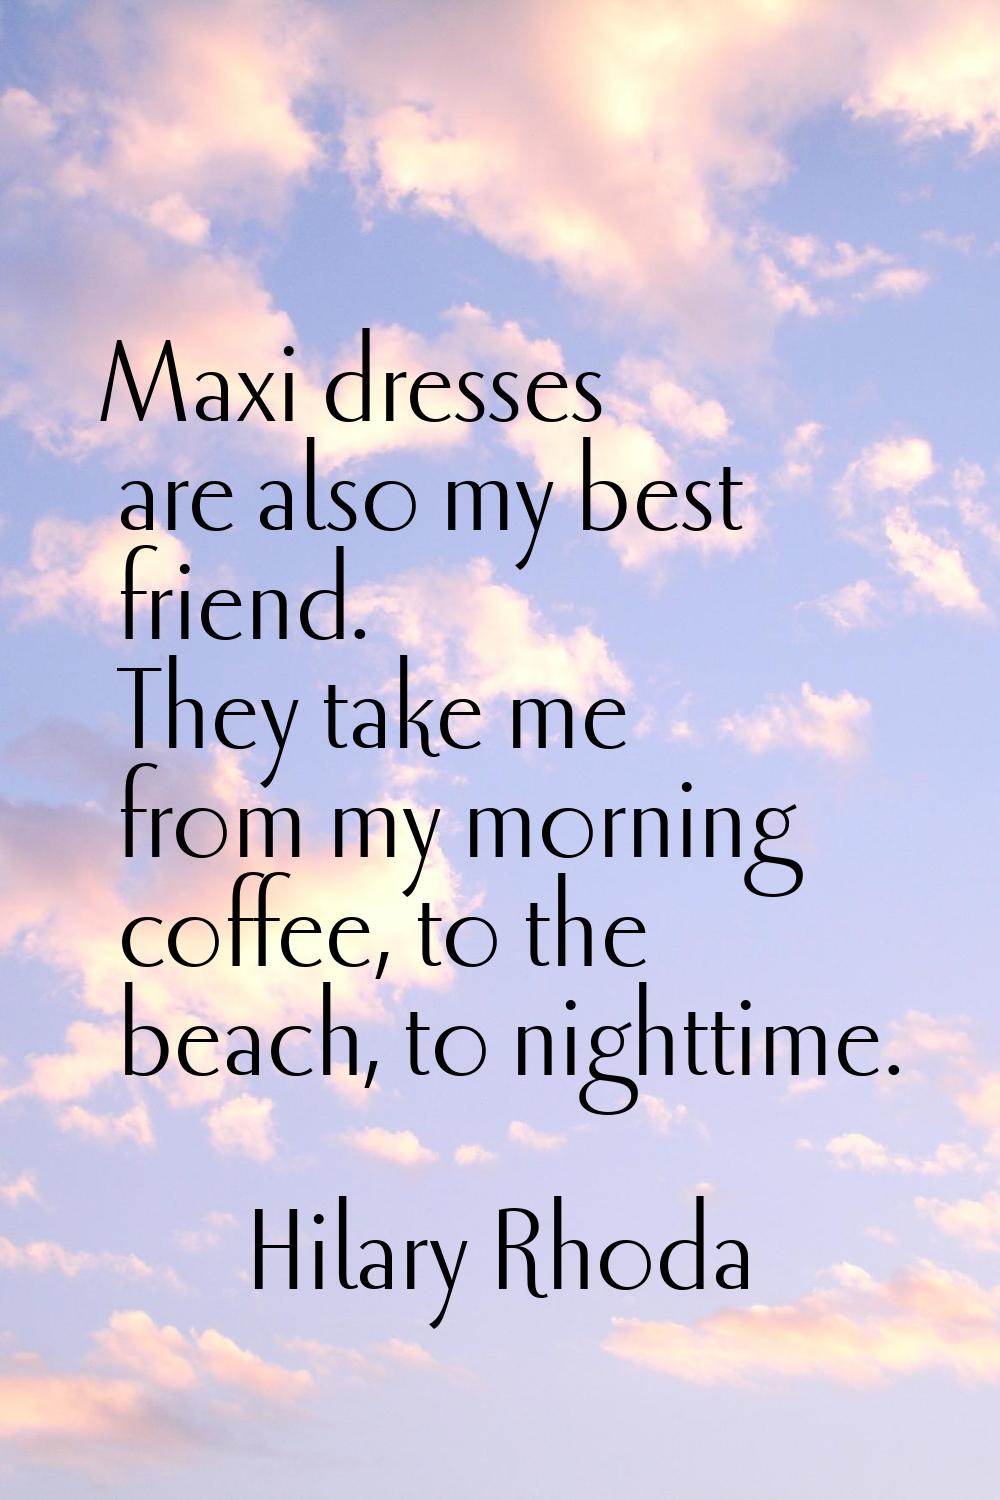 Maxi dresses are also my best friend. They take me from my morning coffee, to the beach, to nightti